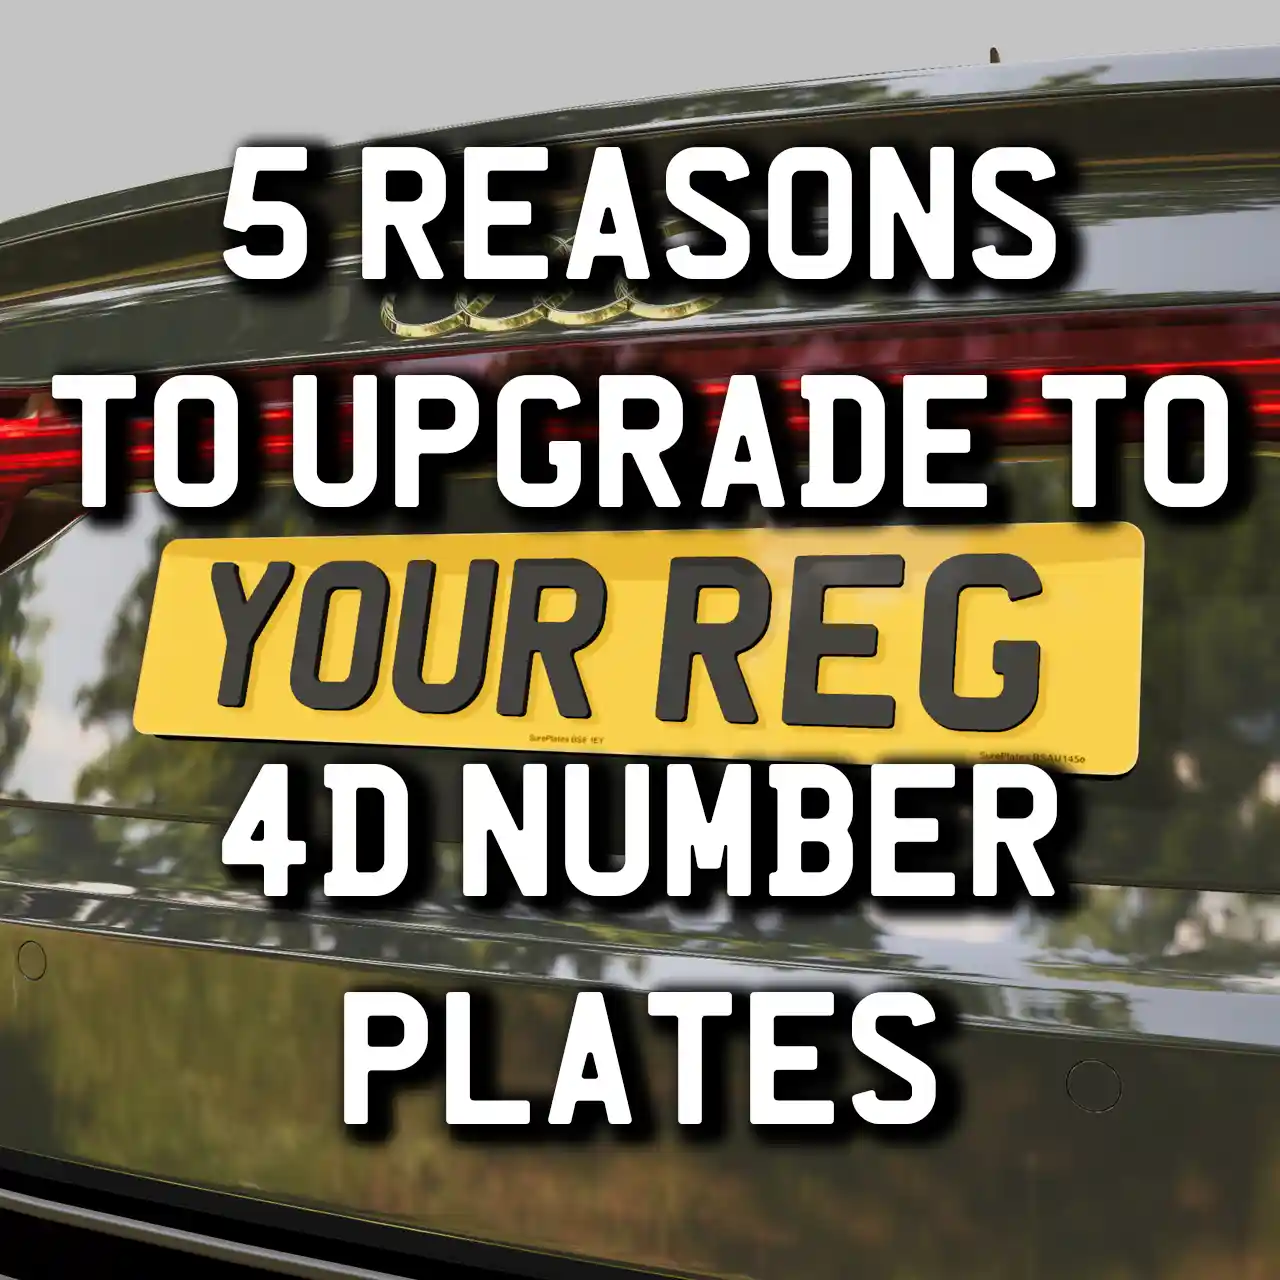 sureplates the top 5 reasons to upgrade to 4D number plates today